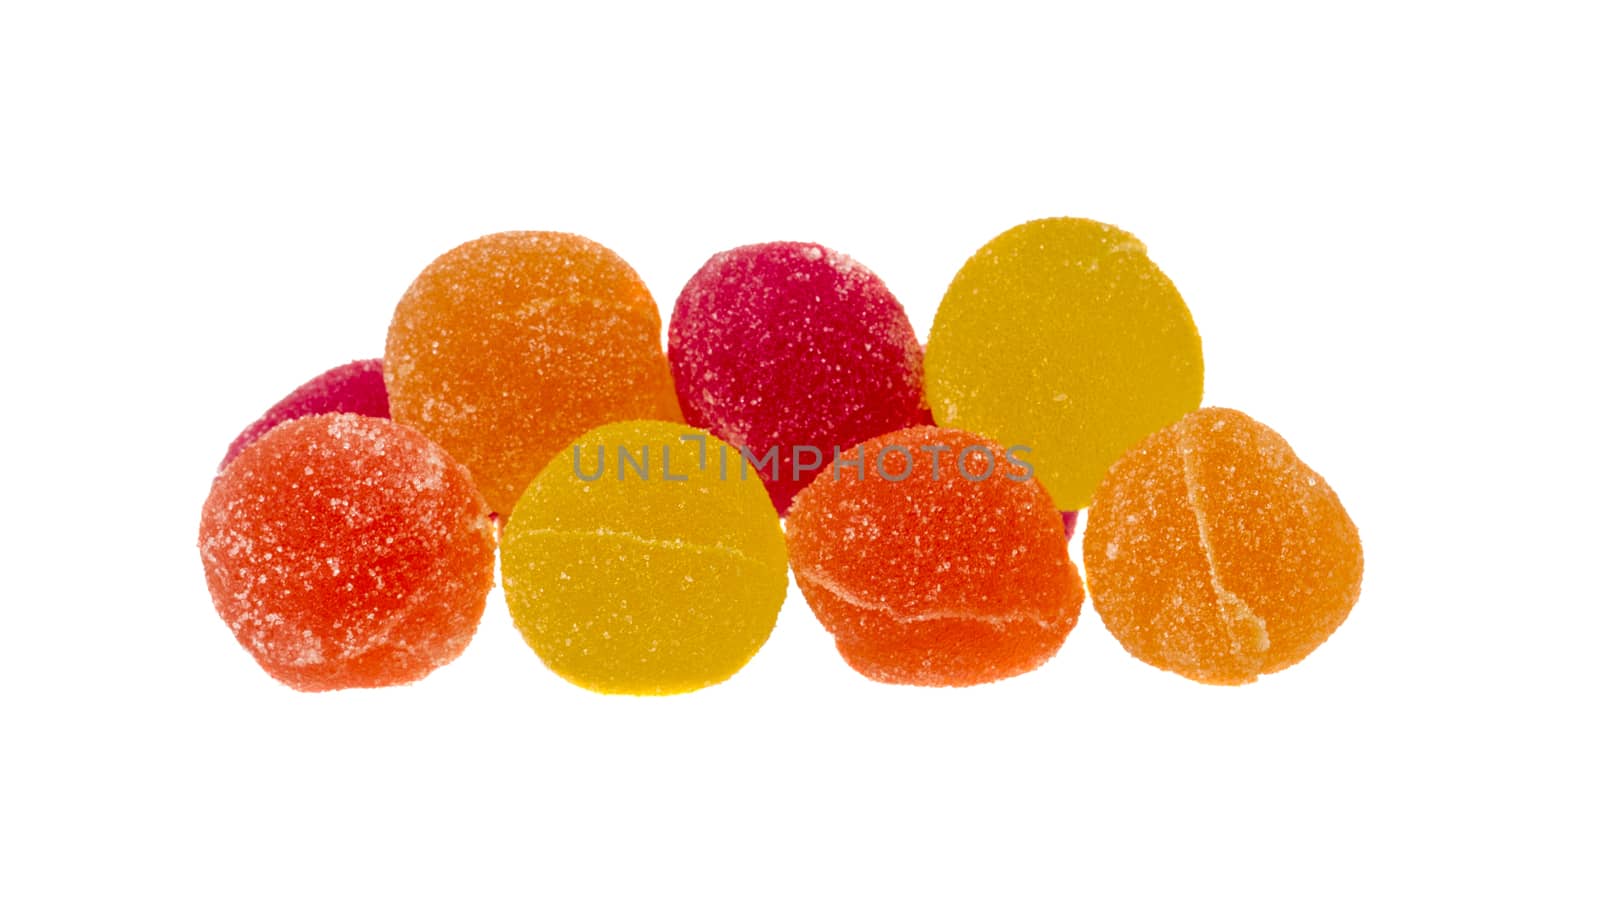 Marmalade Candy Balls on white Background by gstalker